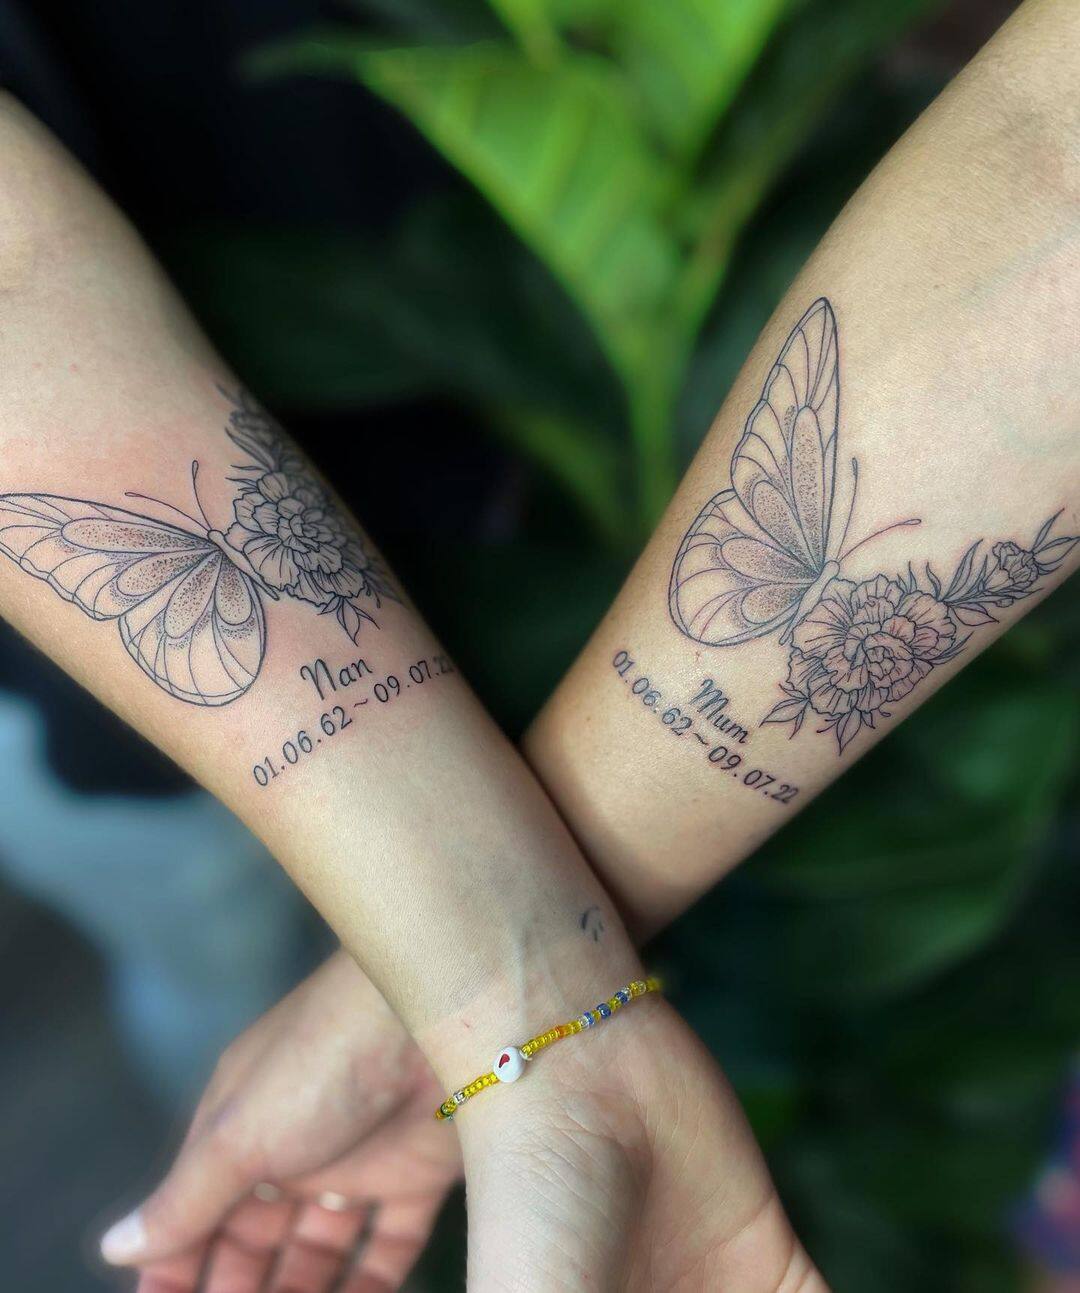 10 best friend matching butterfly tattoos ideas (small and large) - Tuko.co.ke